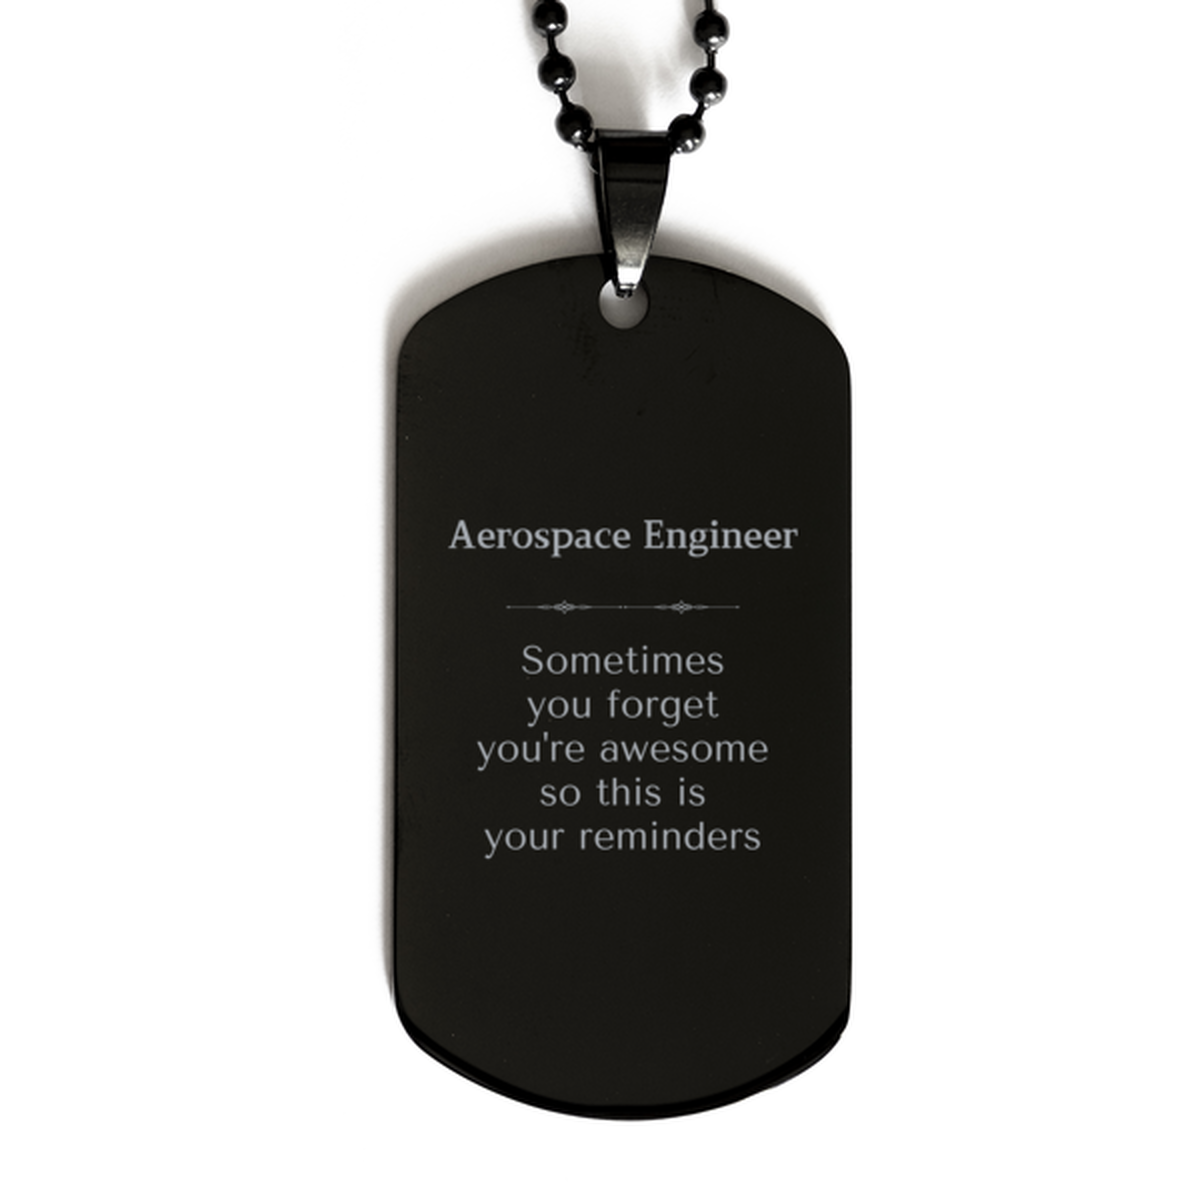 Sentimental Aerospace Engineer Black Dog Tag, Aerospace Engineer Sometimes you forget you're awesome so this is your reminders, Graduation Christmas Birthday Gifts for Aerospace Engineer, Men, Women, Coworkers